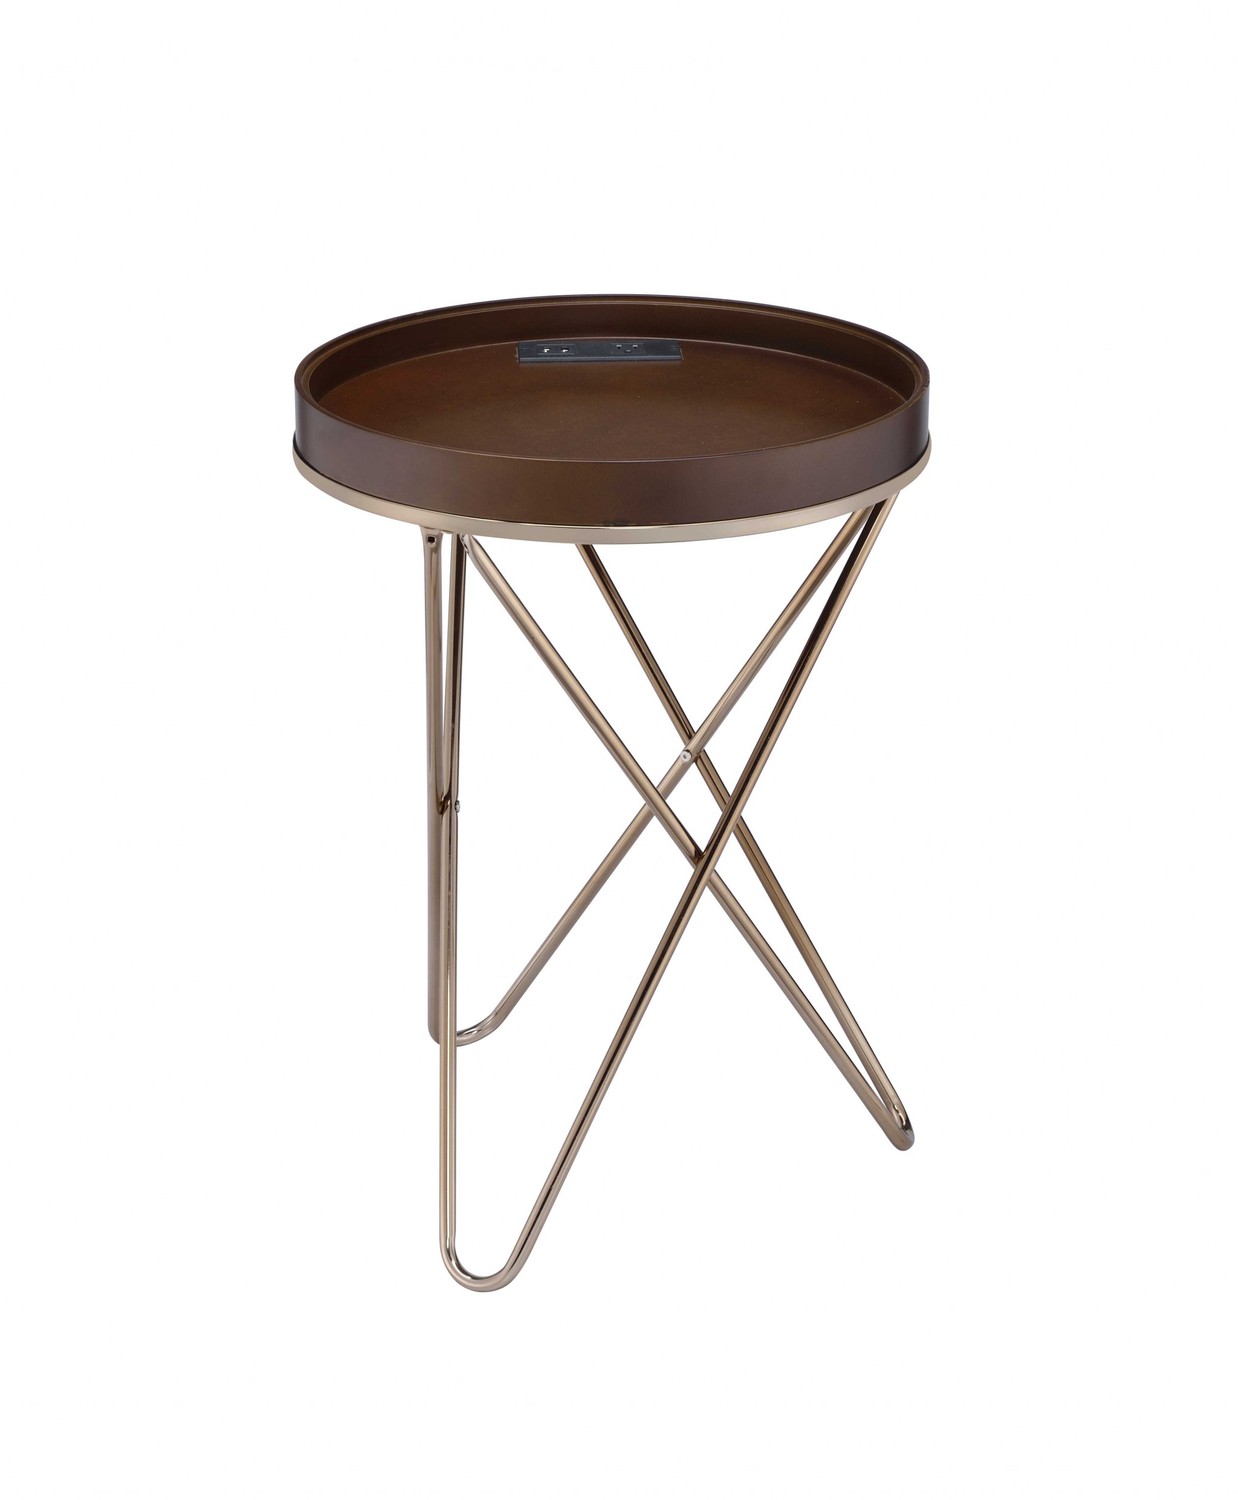 18" X 18" X 25" Walnut And Champagne Metal Tube Side Table